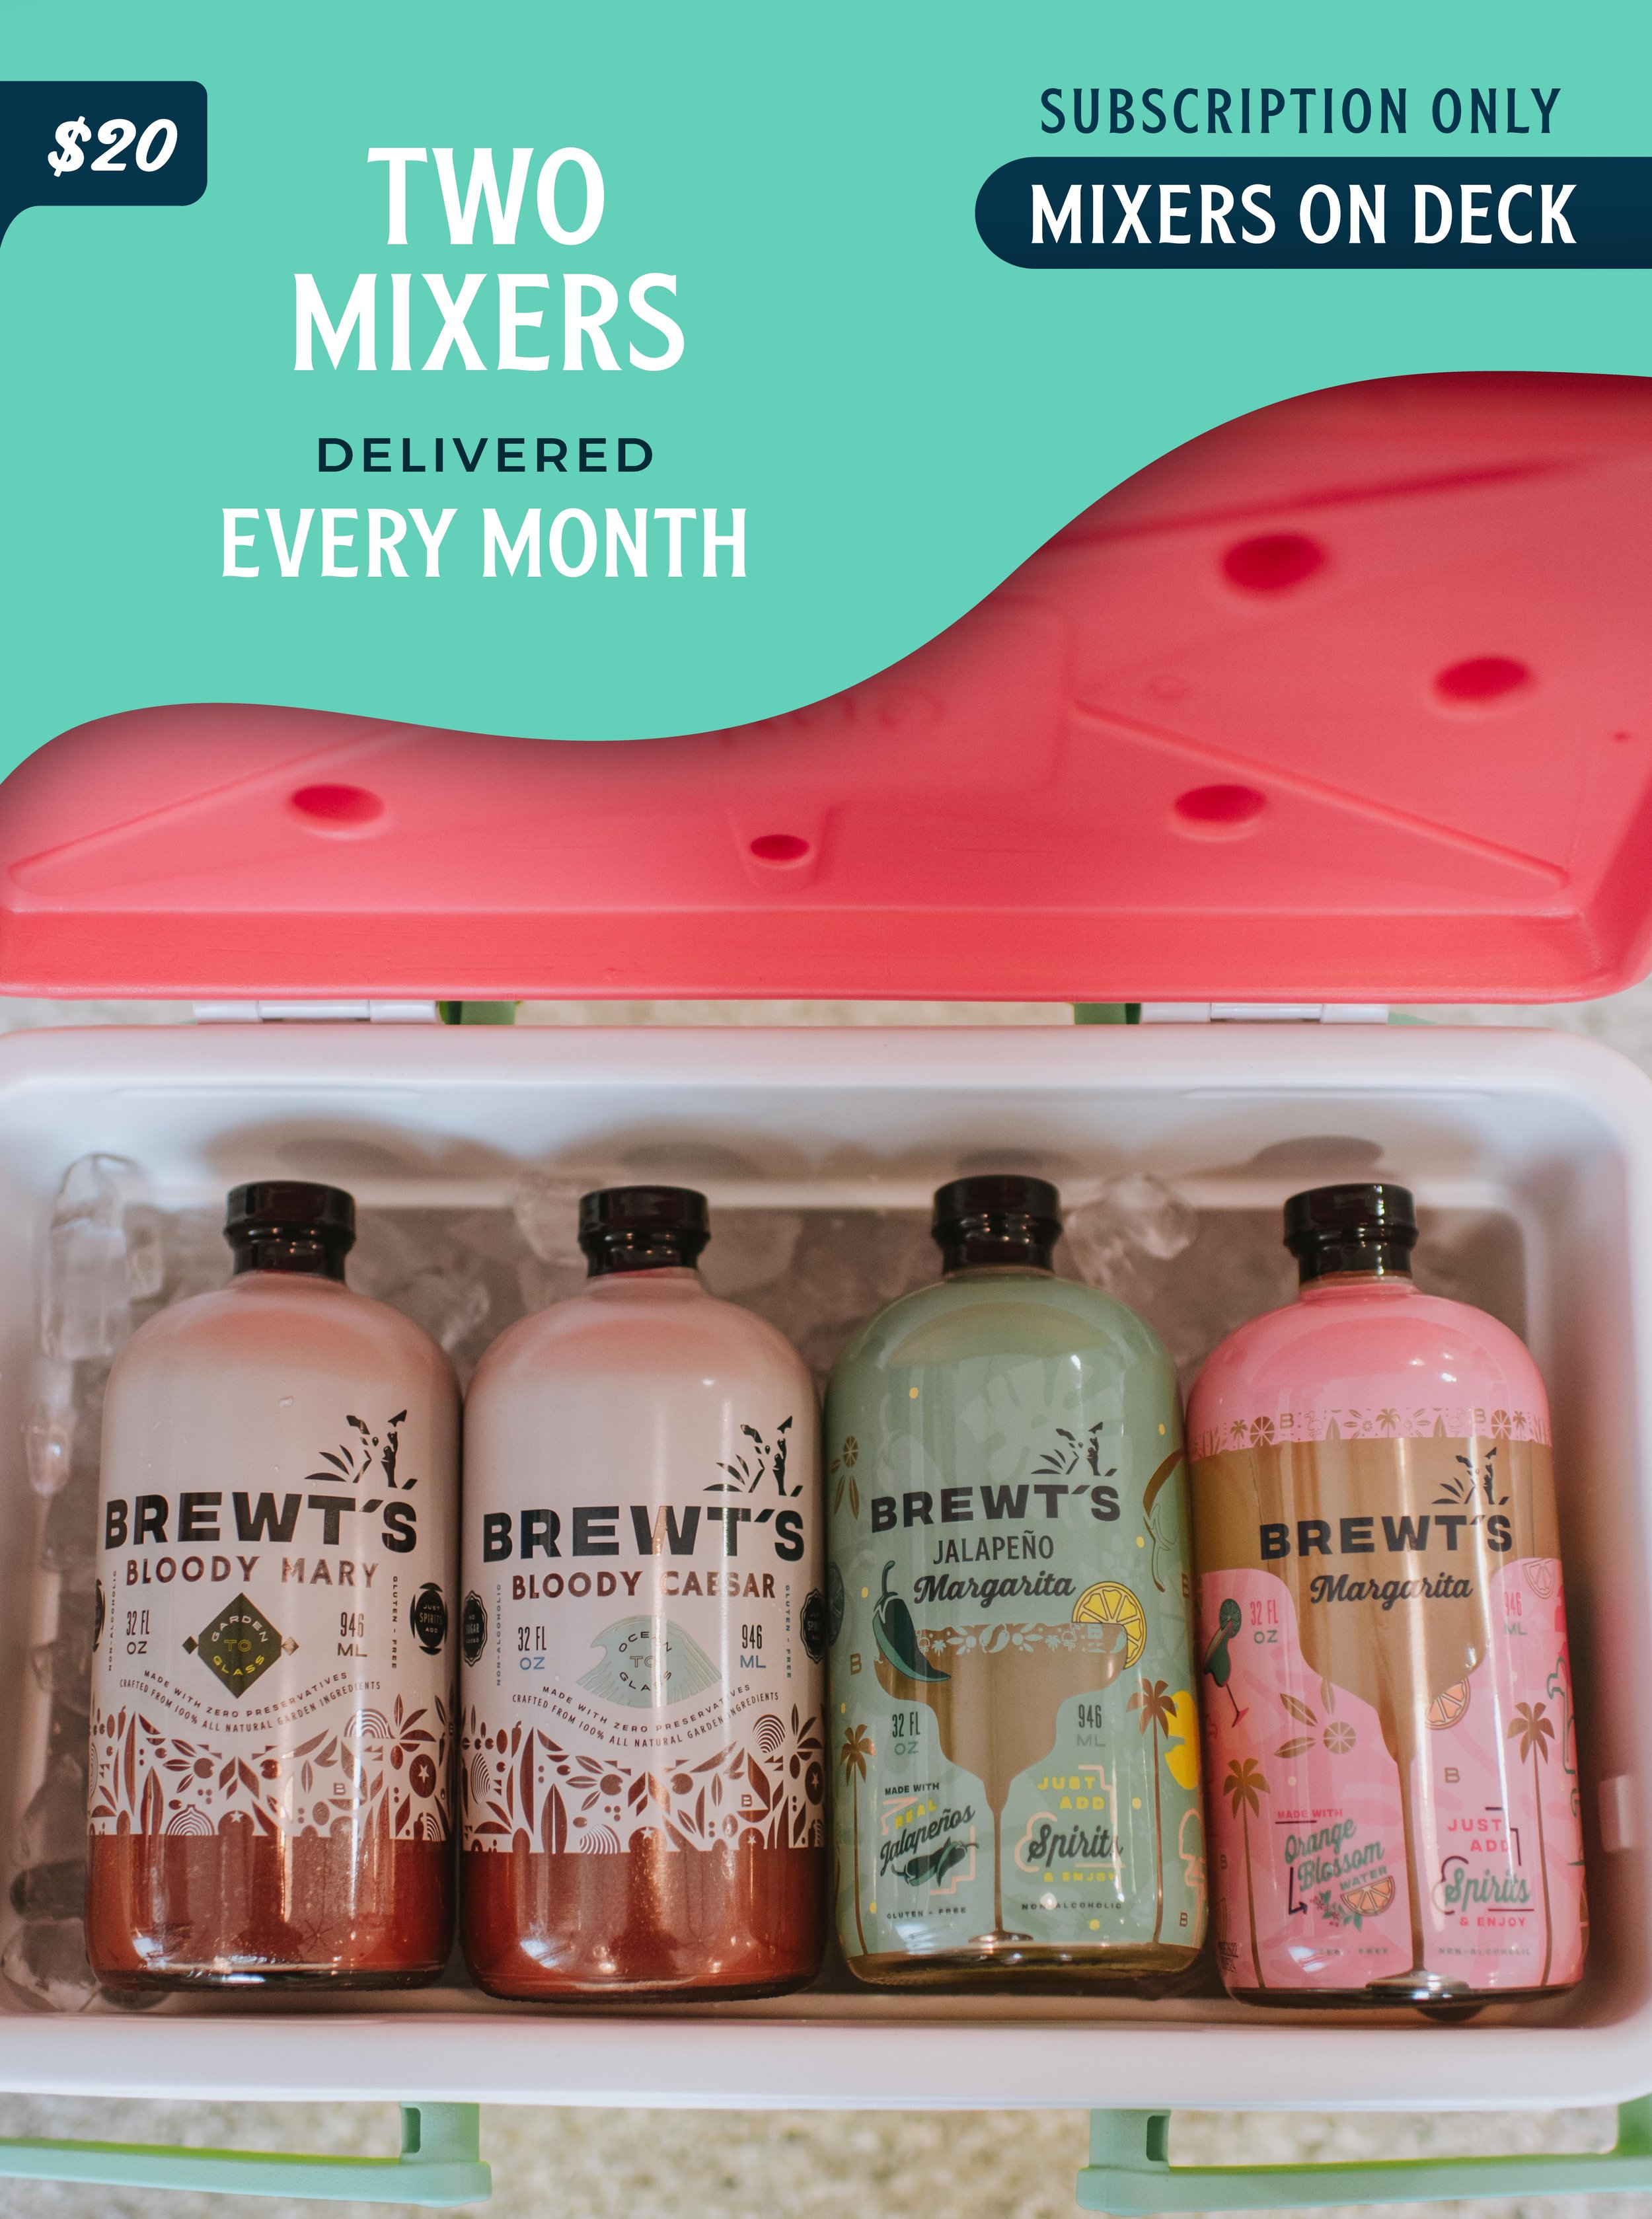 Mixers On Deck Subscription Only — BREWT'S